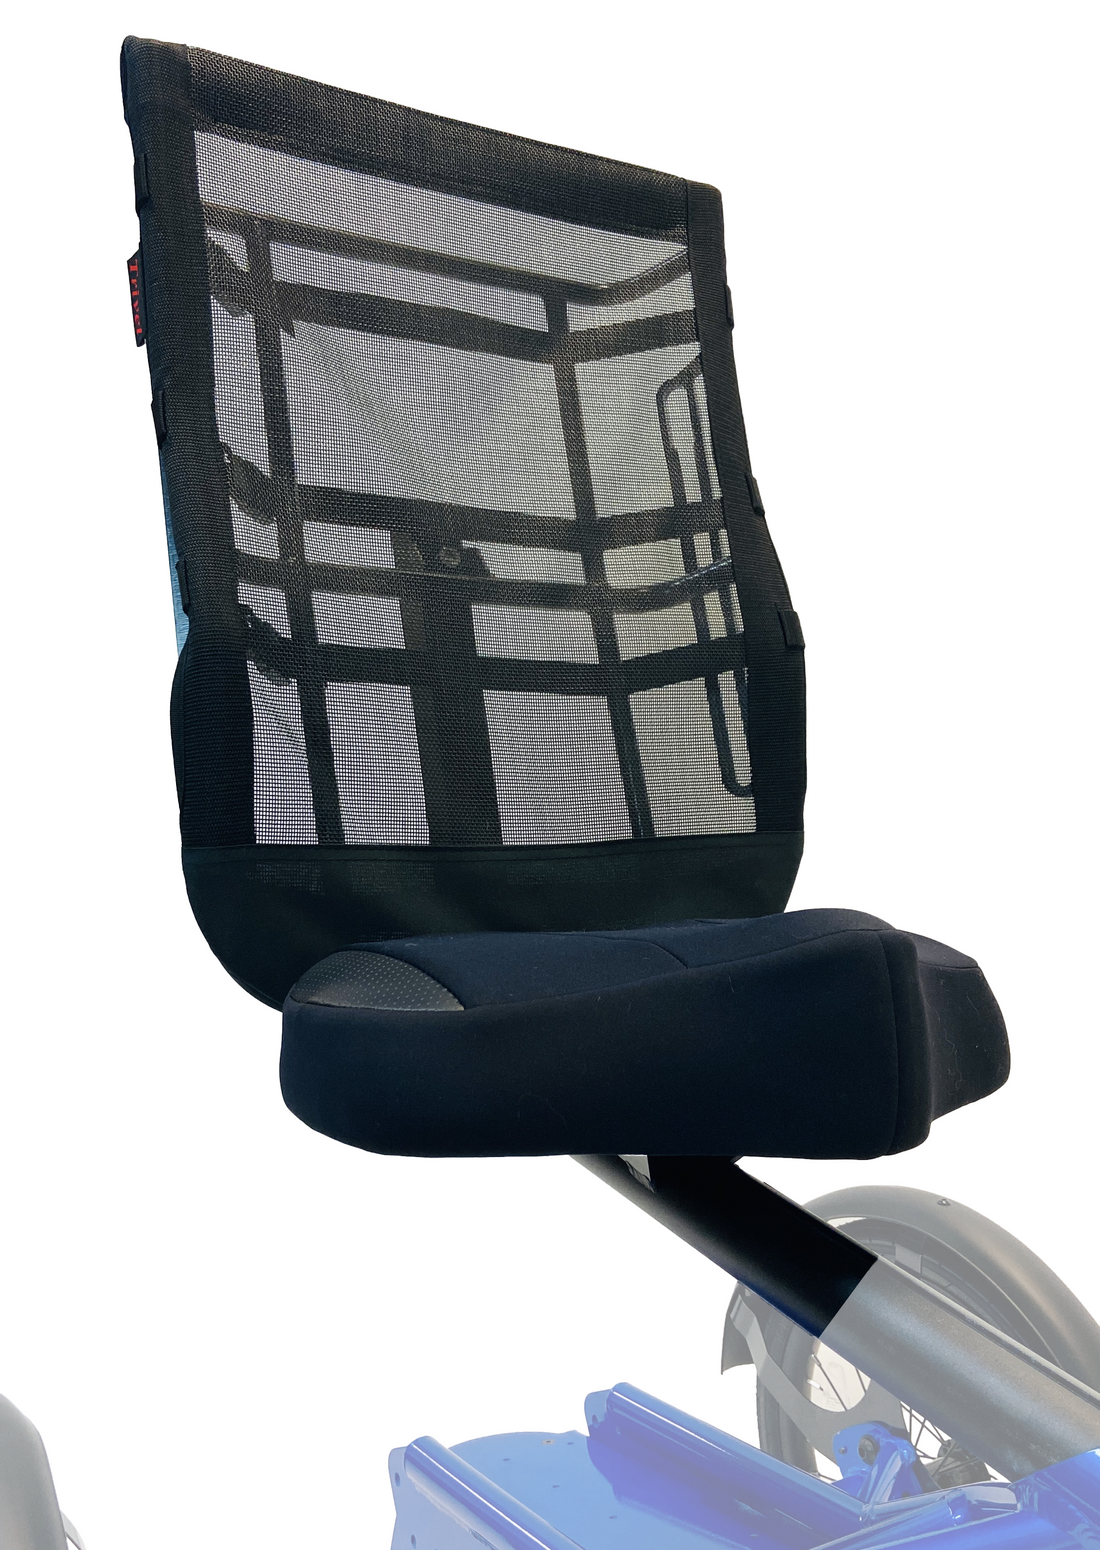 Seat and backrest Comfort plus